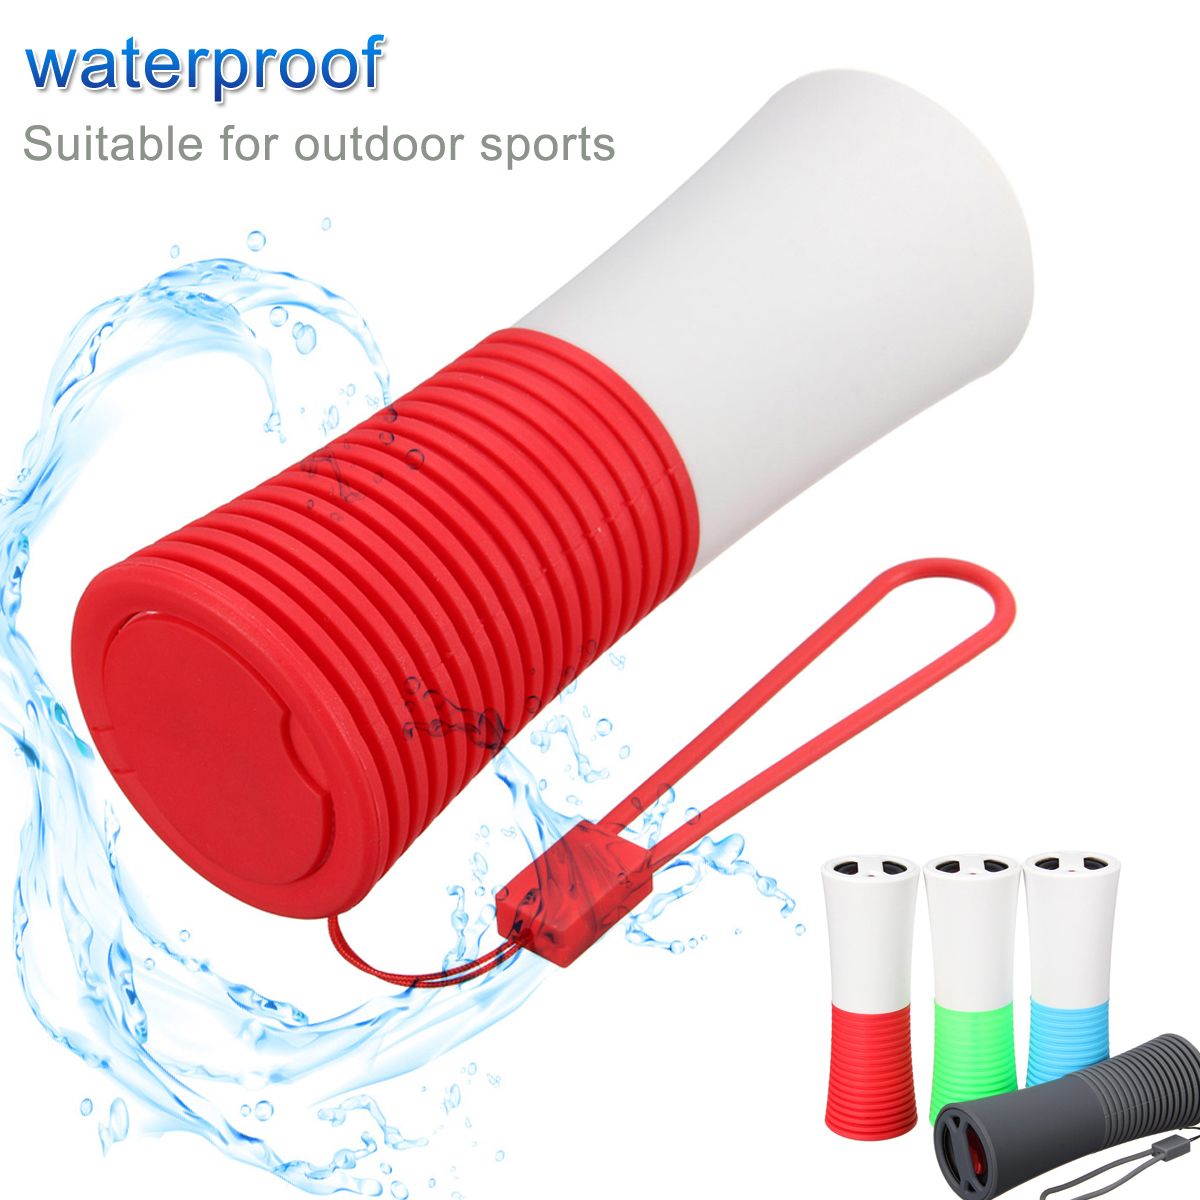 Universal-Waterproof-bluetooth-Portable-Speaker-4000mAh-Power-Bank-Outdoor-Sport-Applicable-for-Smar-999739